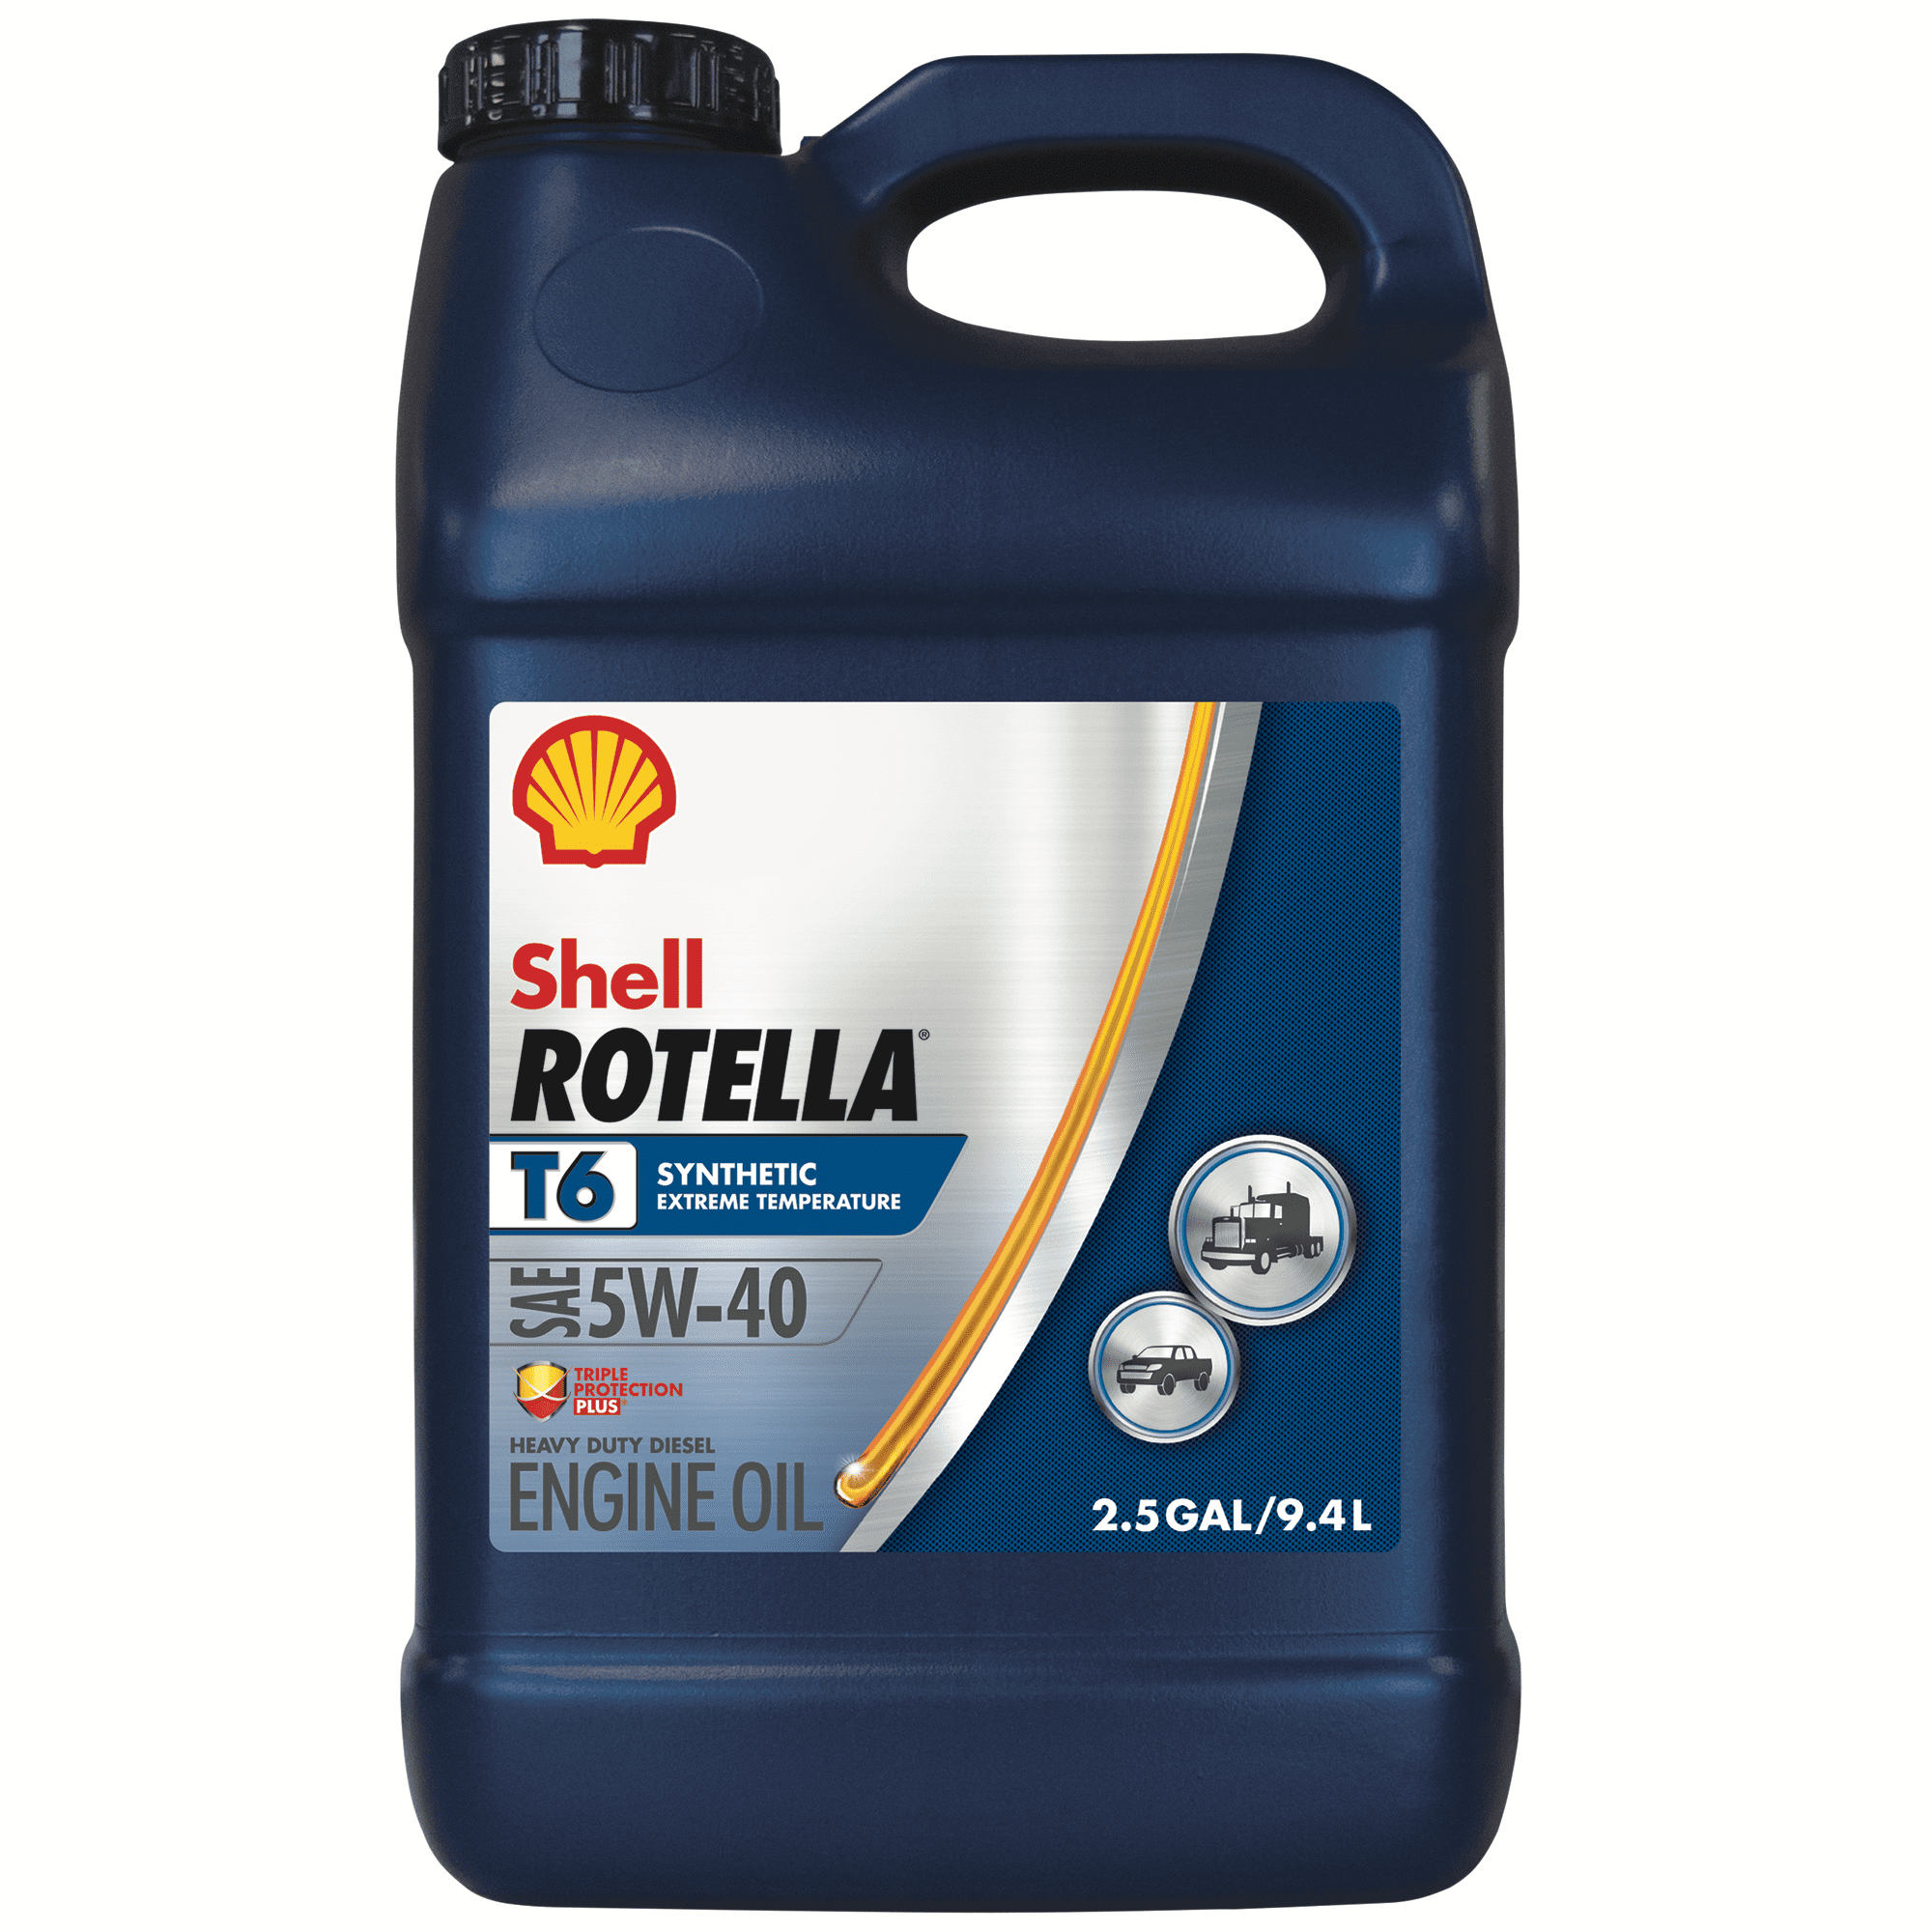 shell-rotella-t6-full-synthetic-5w-40-diesel-engine-oil-2-5-gallon